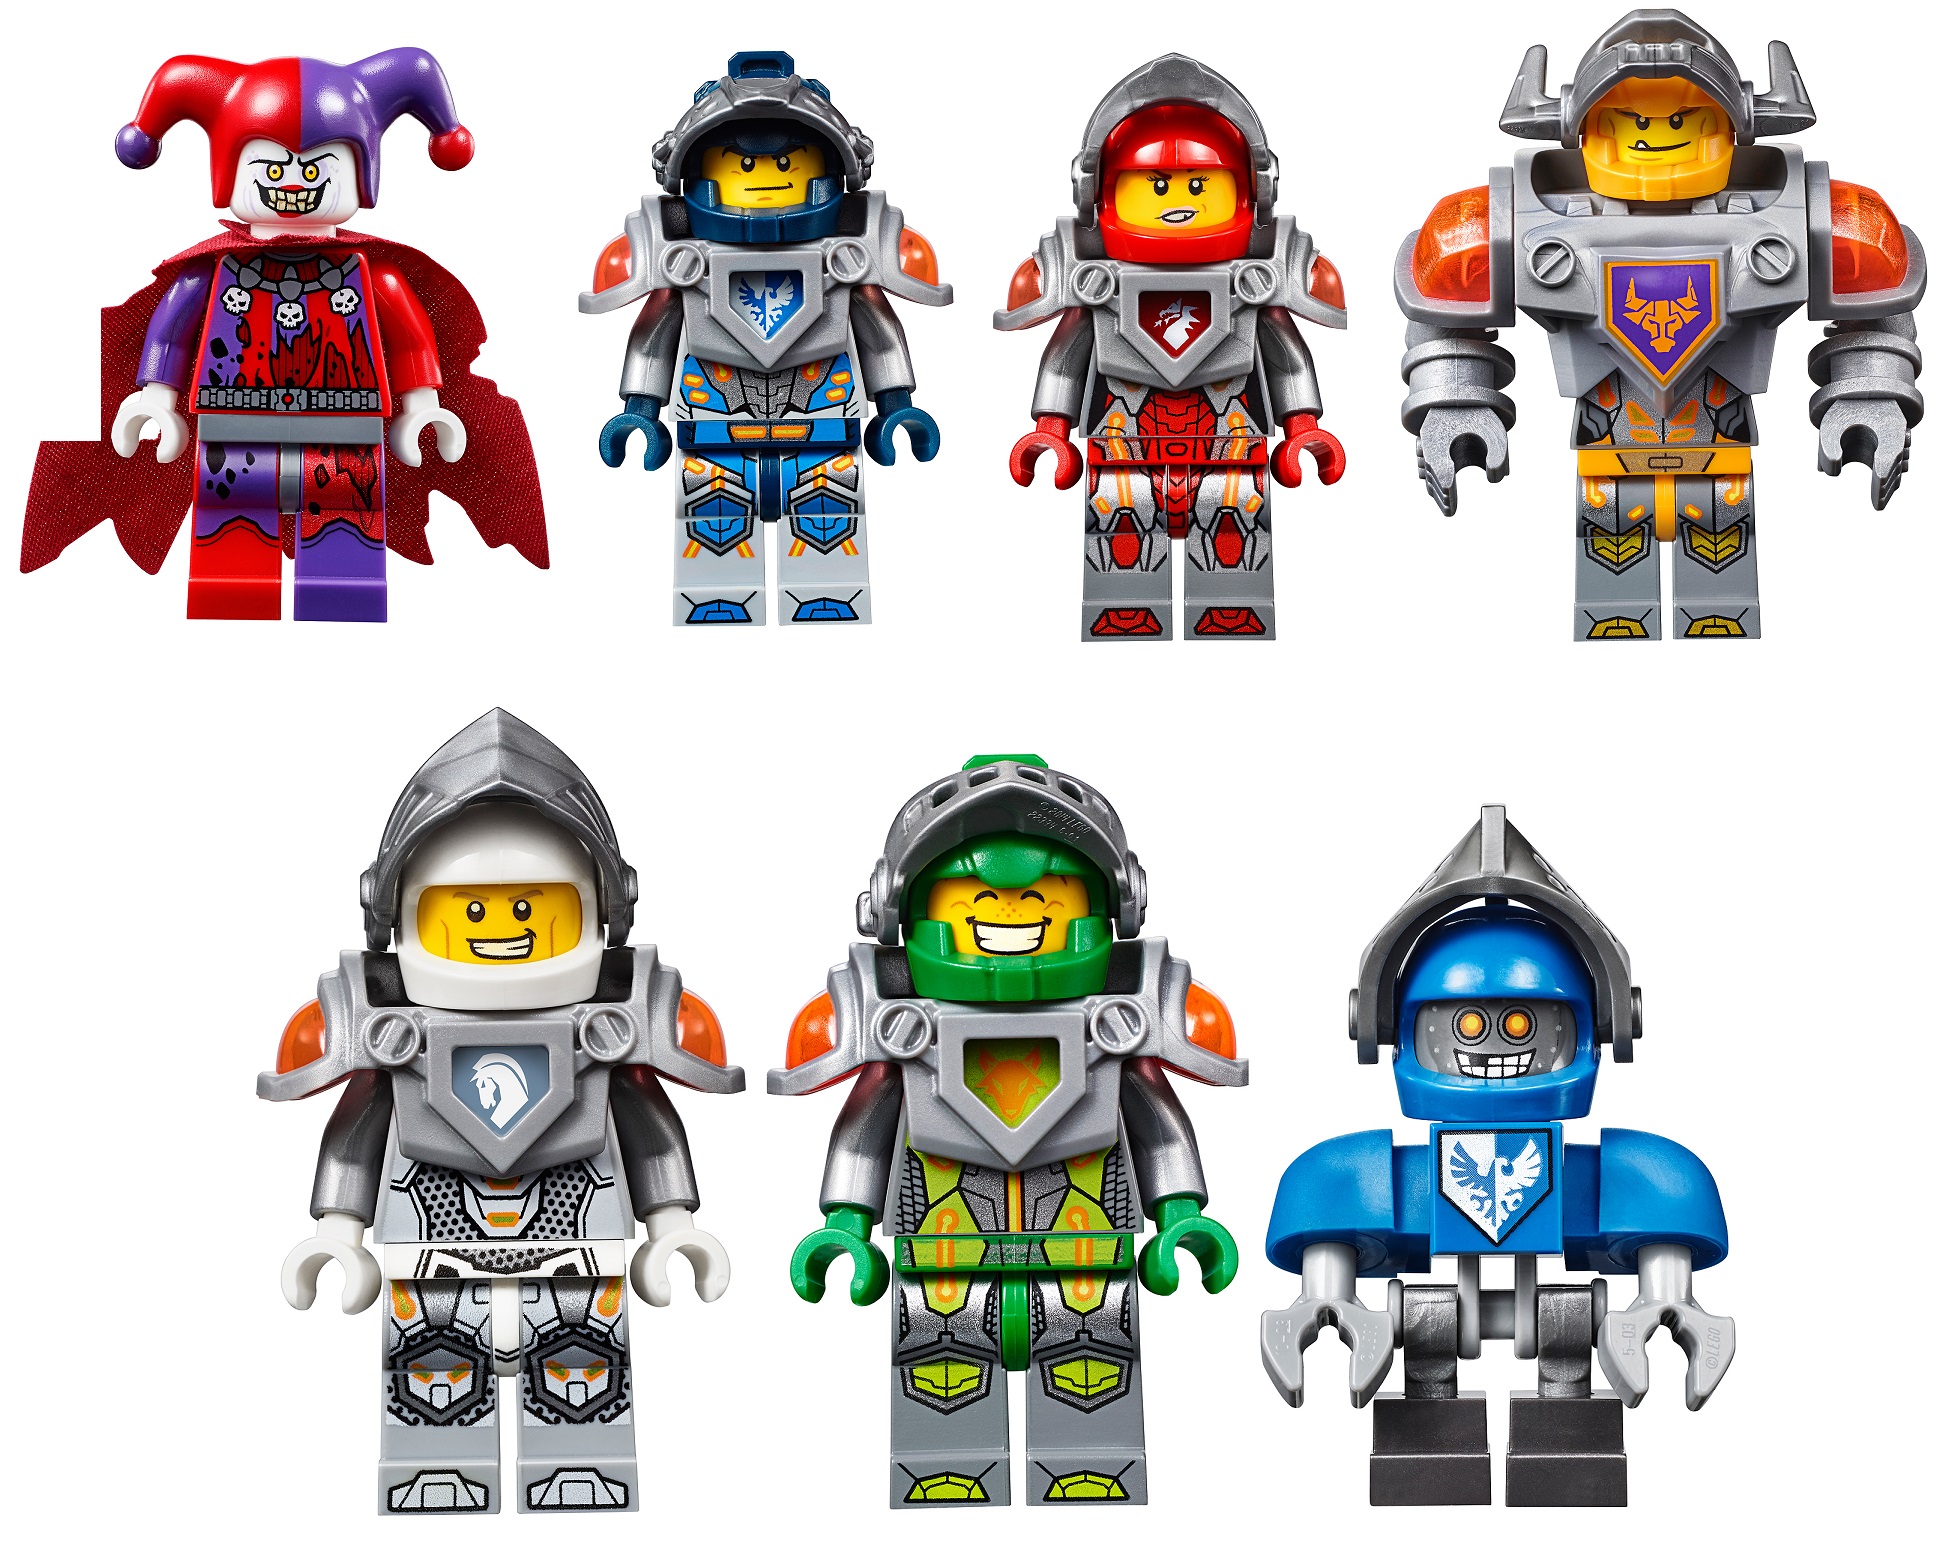 honor Thermal drag Lego Nexo Knights Officially Revealed - Minifigure Price Guide